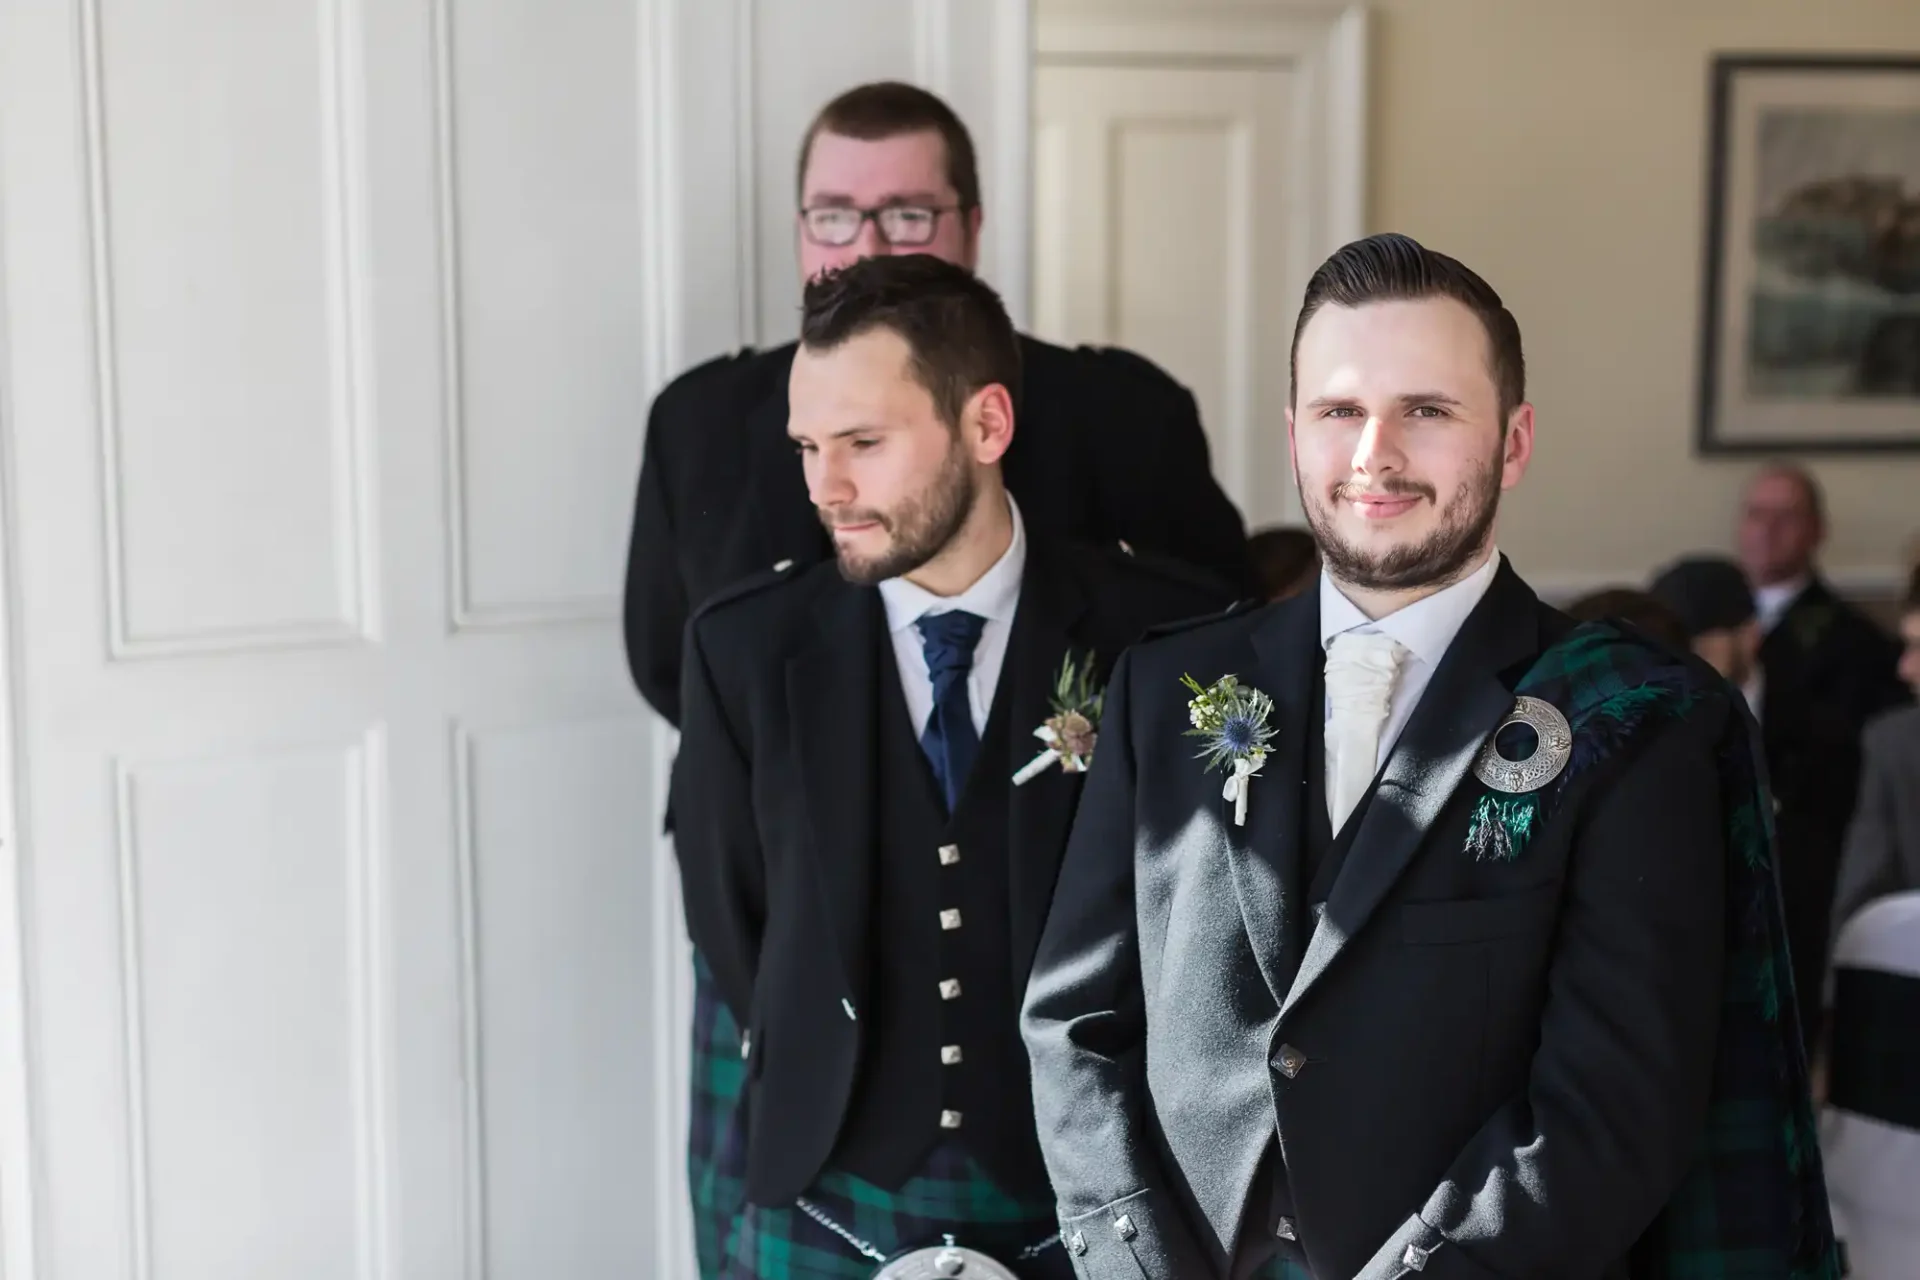 Two men wearing formal attire with tartan elements at an event, one in a kilt, standing in the forefront, with another man partially visible in the background.